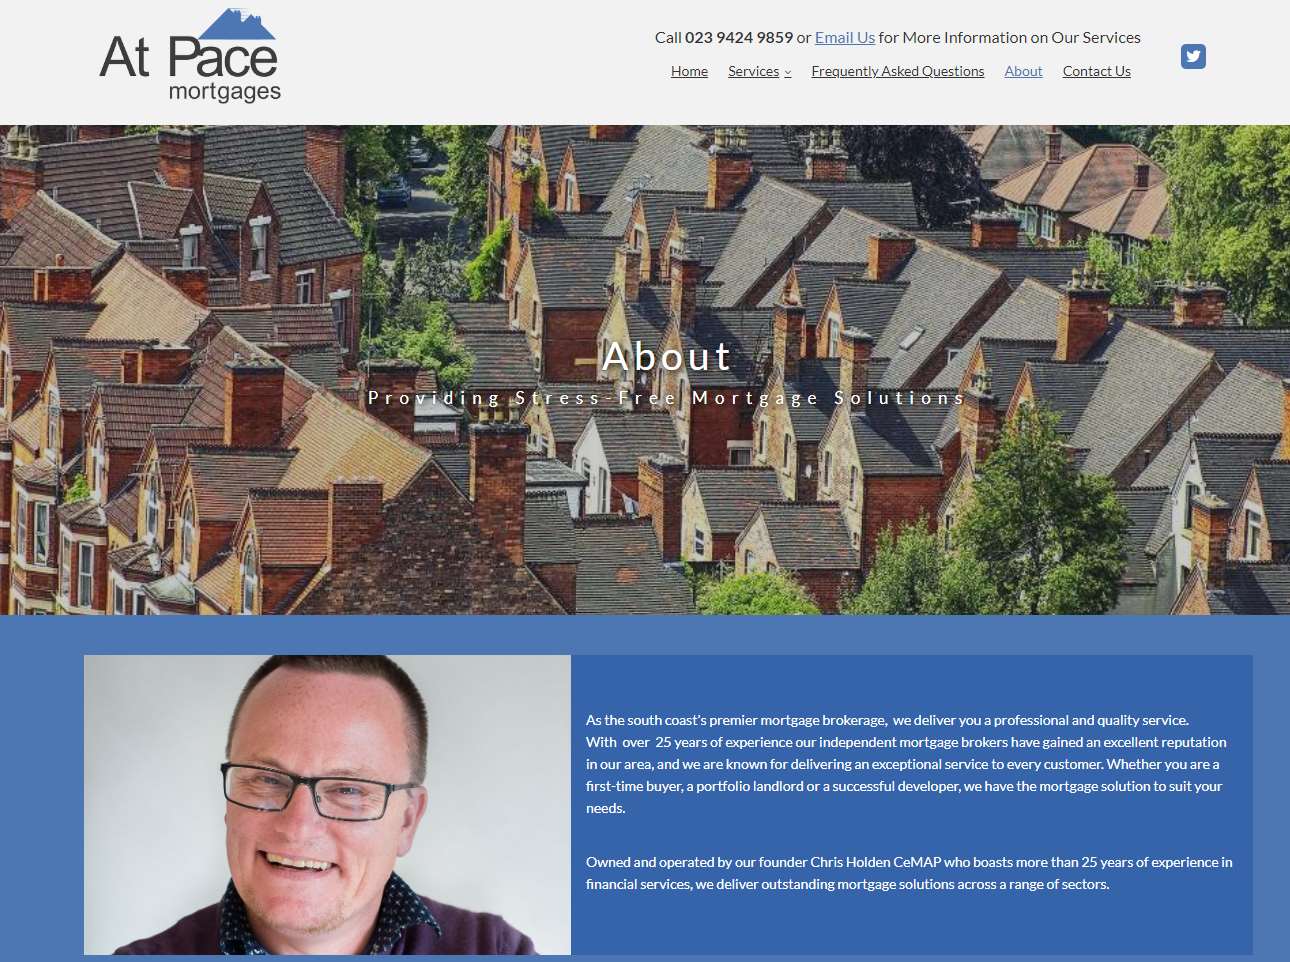 Mr Holden’s At Pace Mortgages website (At Pace Mortgages)